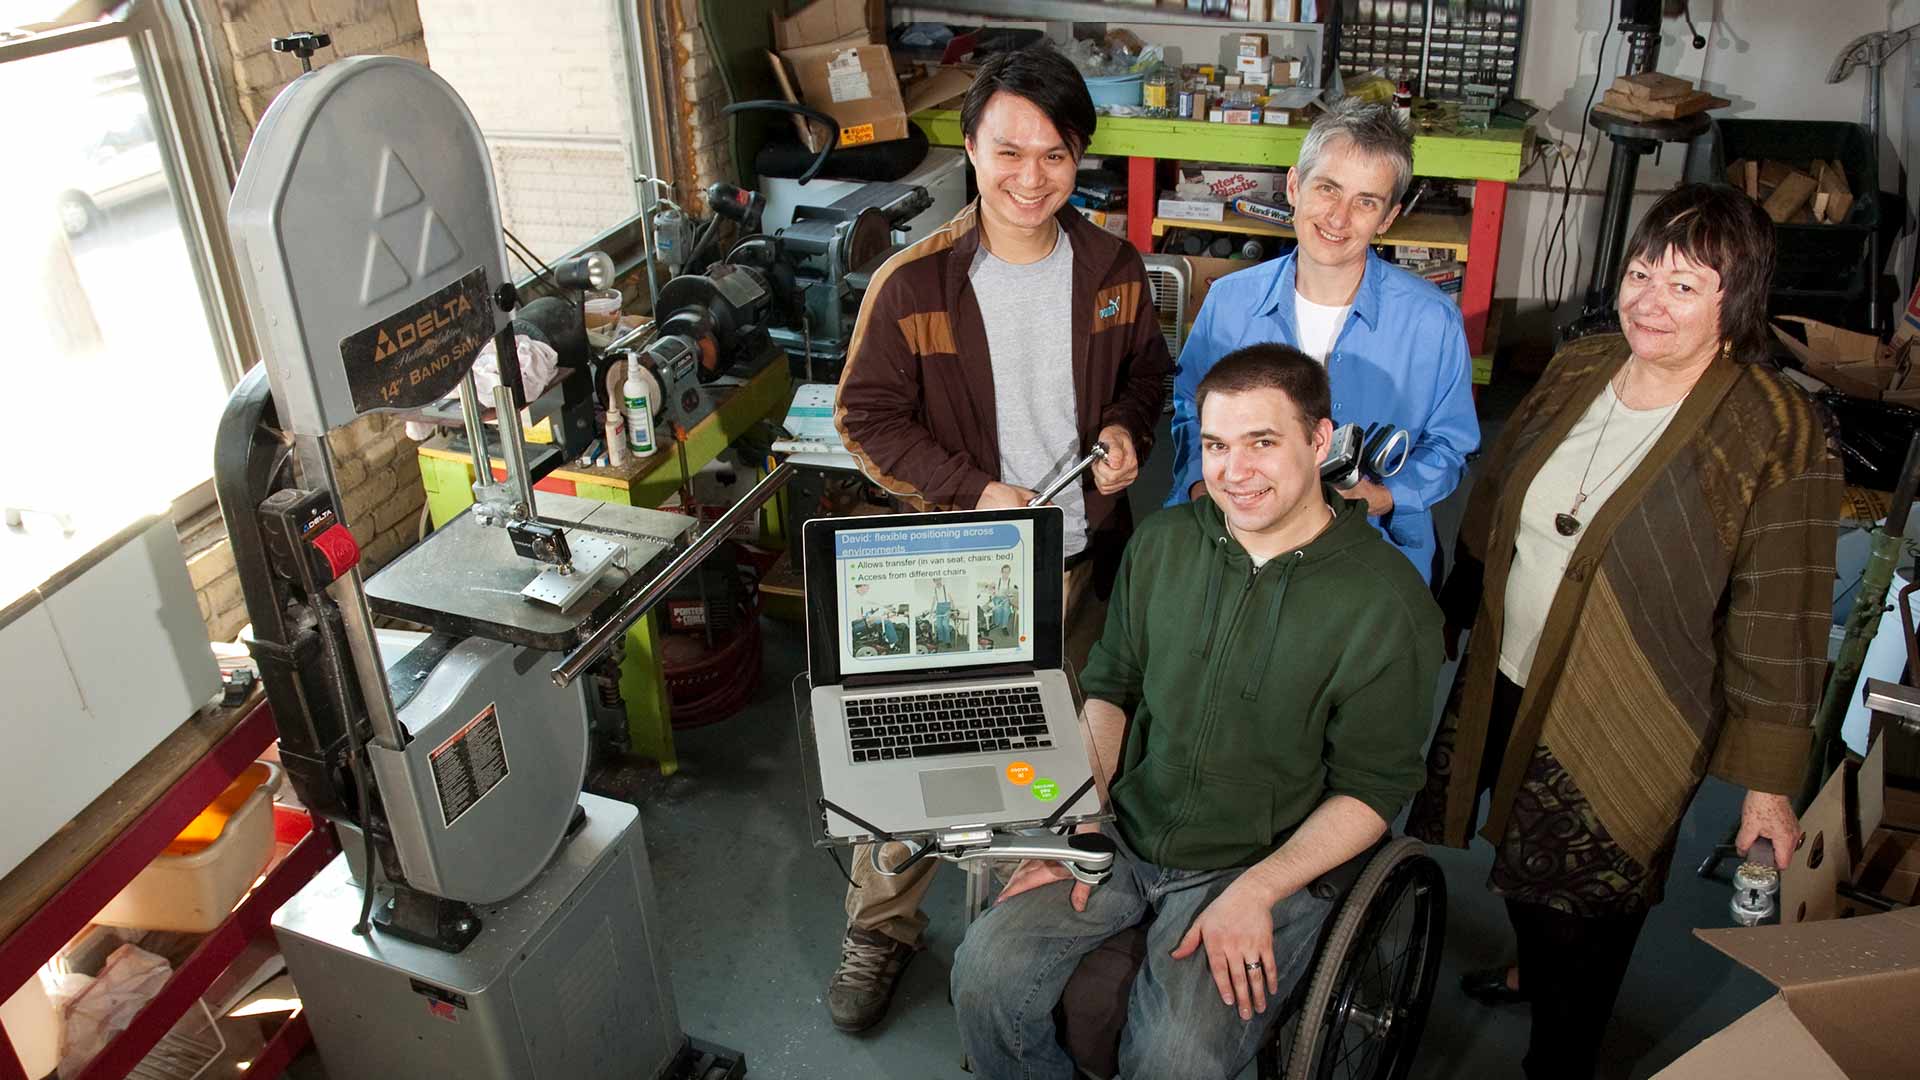 A group posing with an invention for a wheelchair attachment.